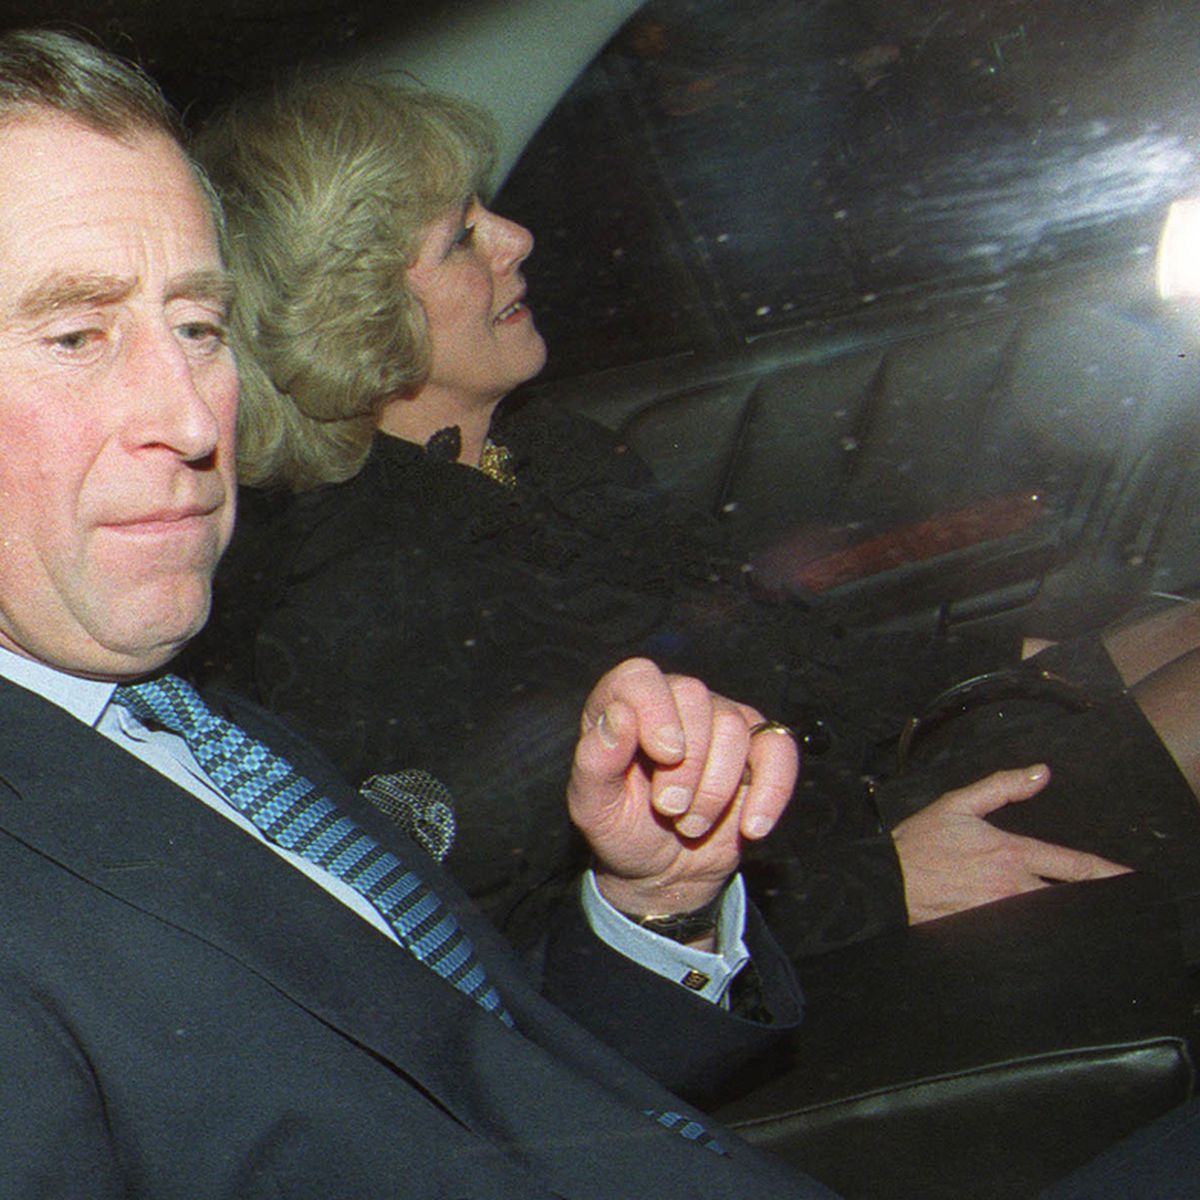 scandal: The truth behind Prince Charles and Camilla's infamous x-rated 'tampon' call - 9Honey